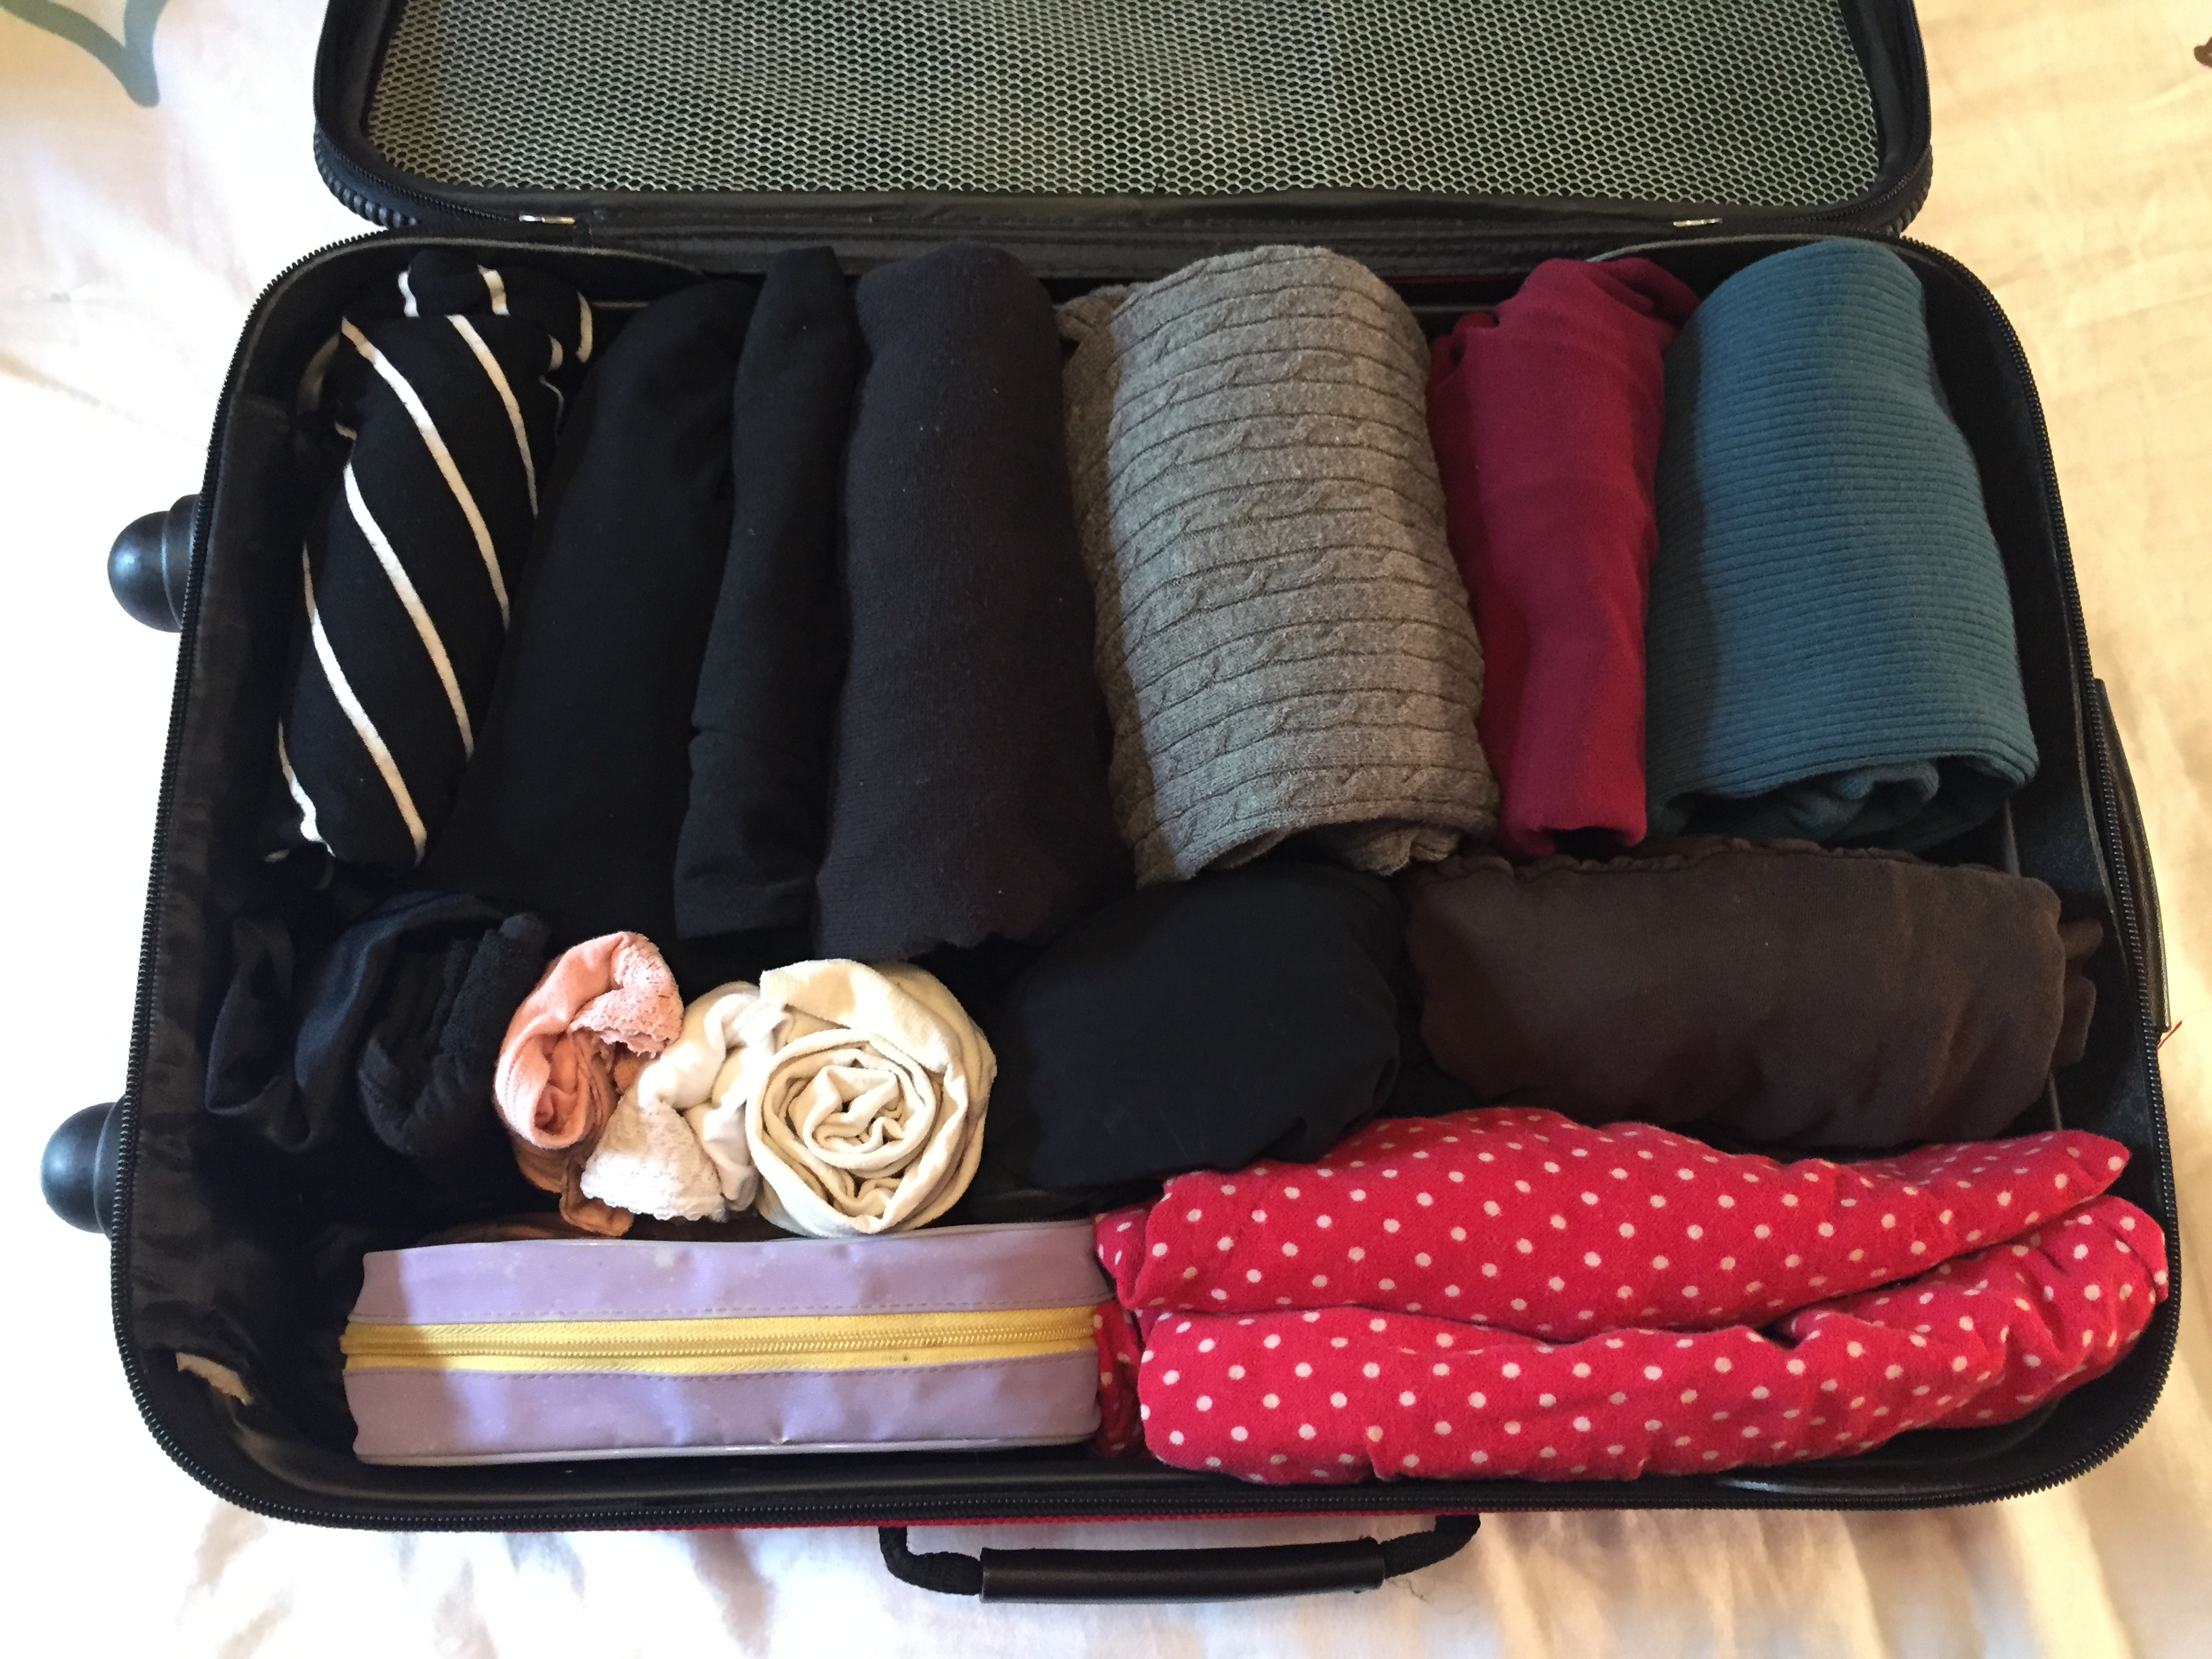 My bag is packed (vertically!)…